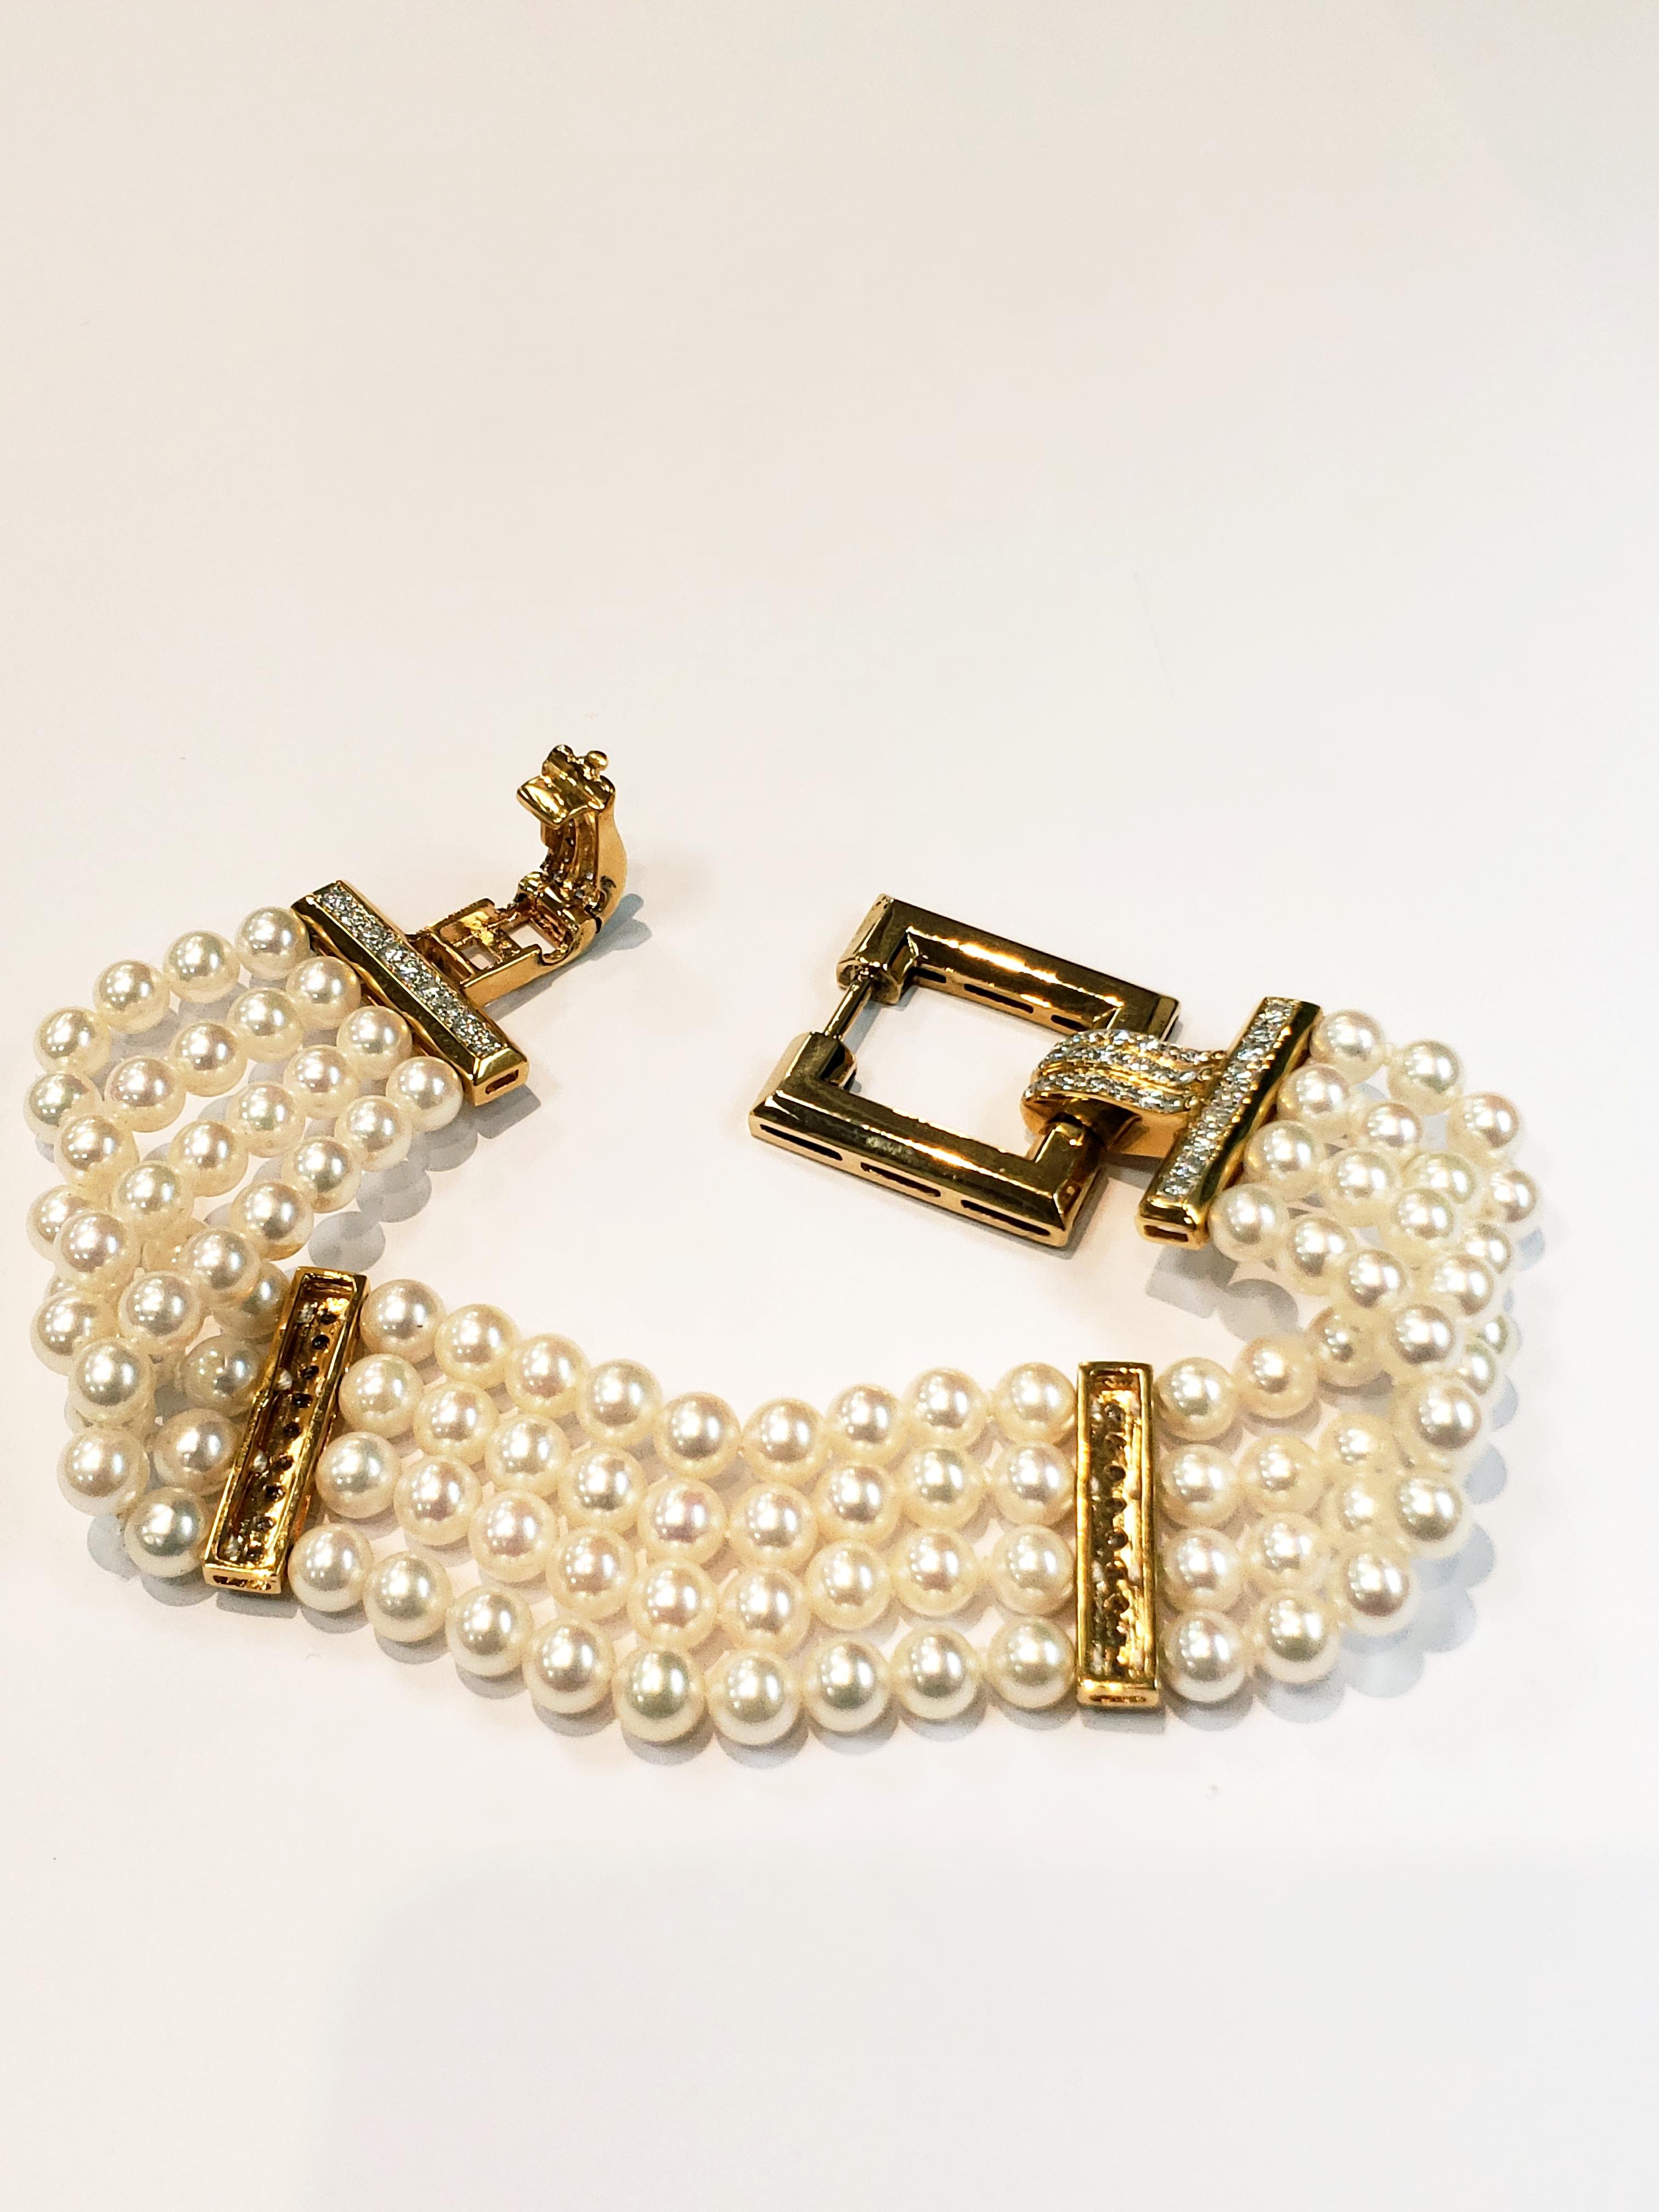 Four-Row Cultured Pearl Bracelet with 18 Karat Yellow Gold Diamonds In Good Condition For Sale In Red Bank, NJ